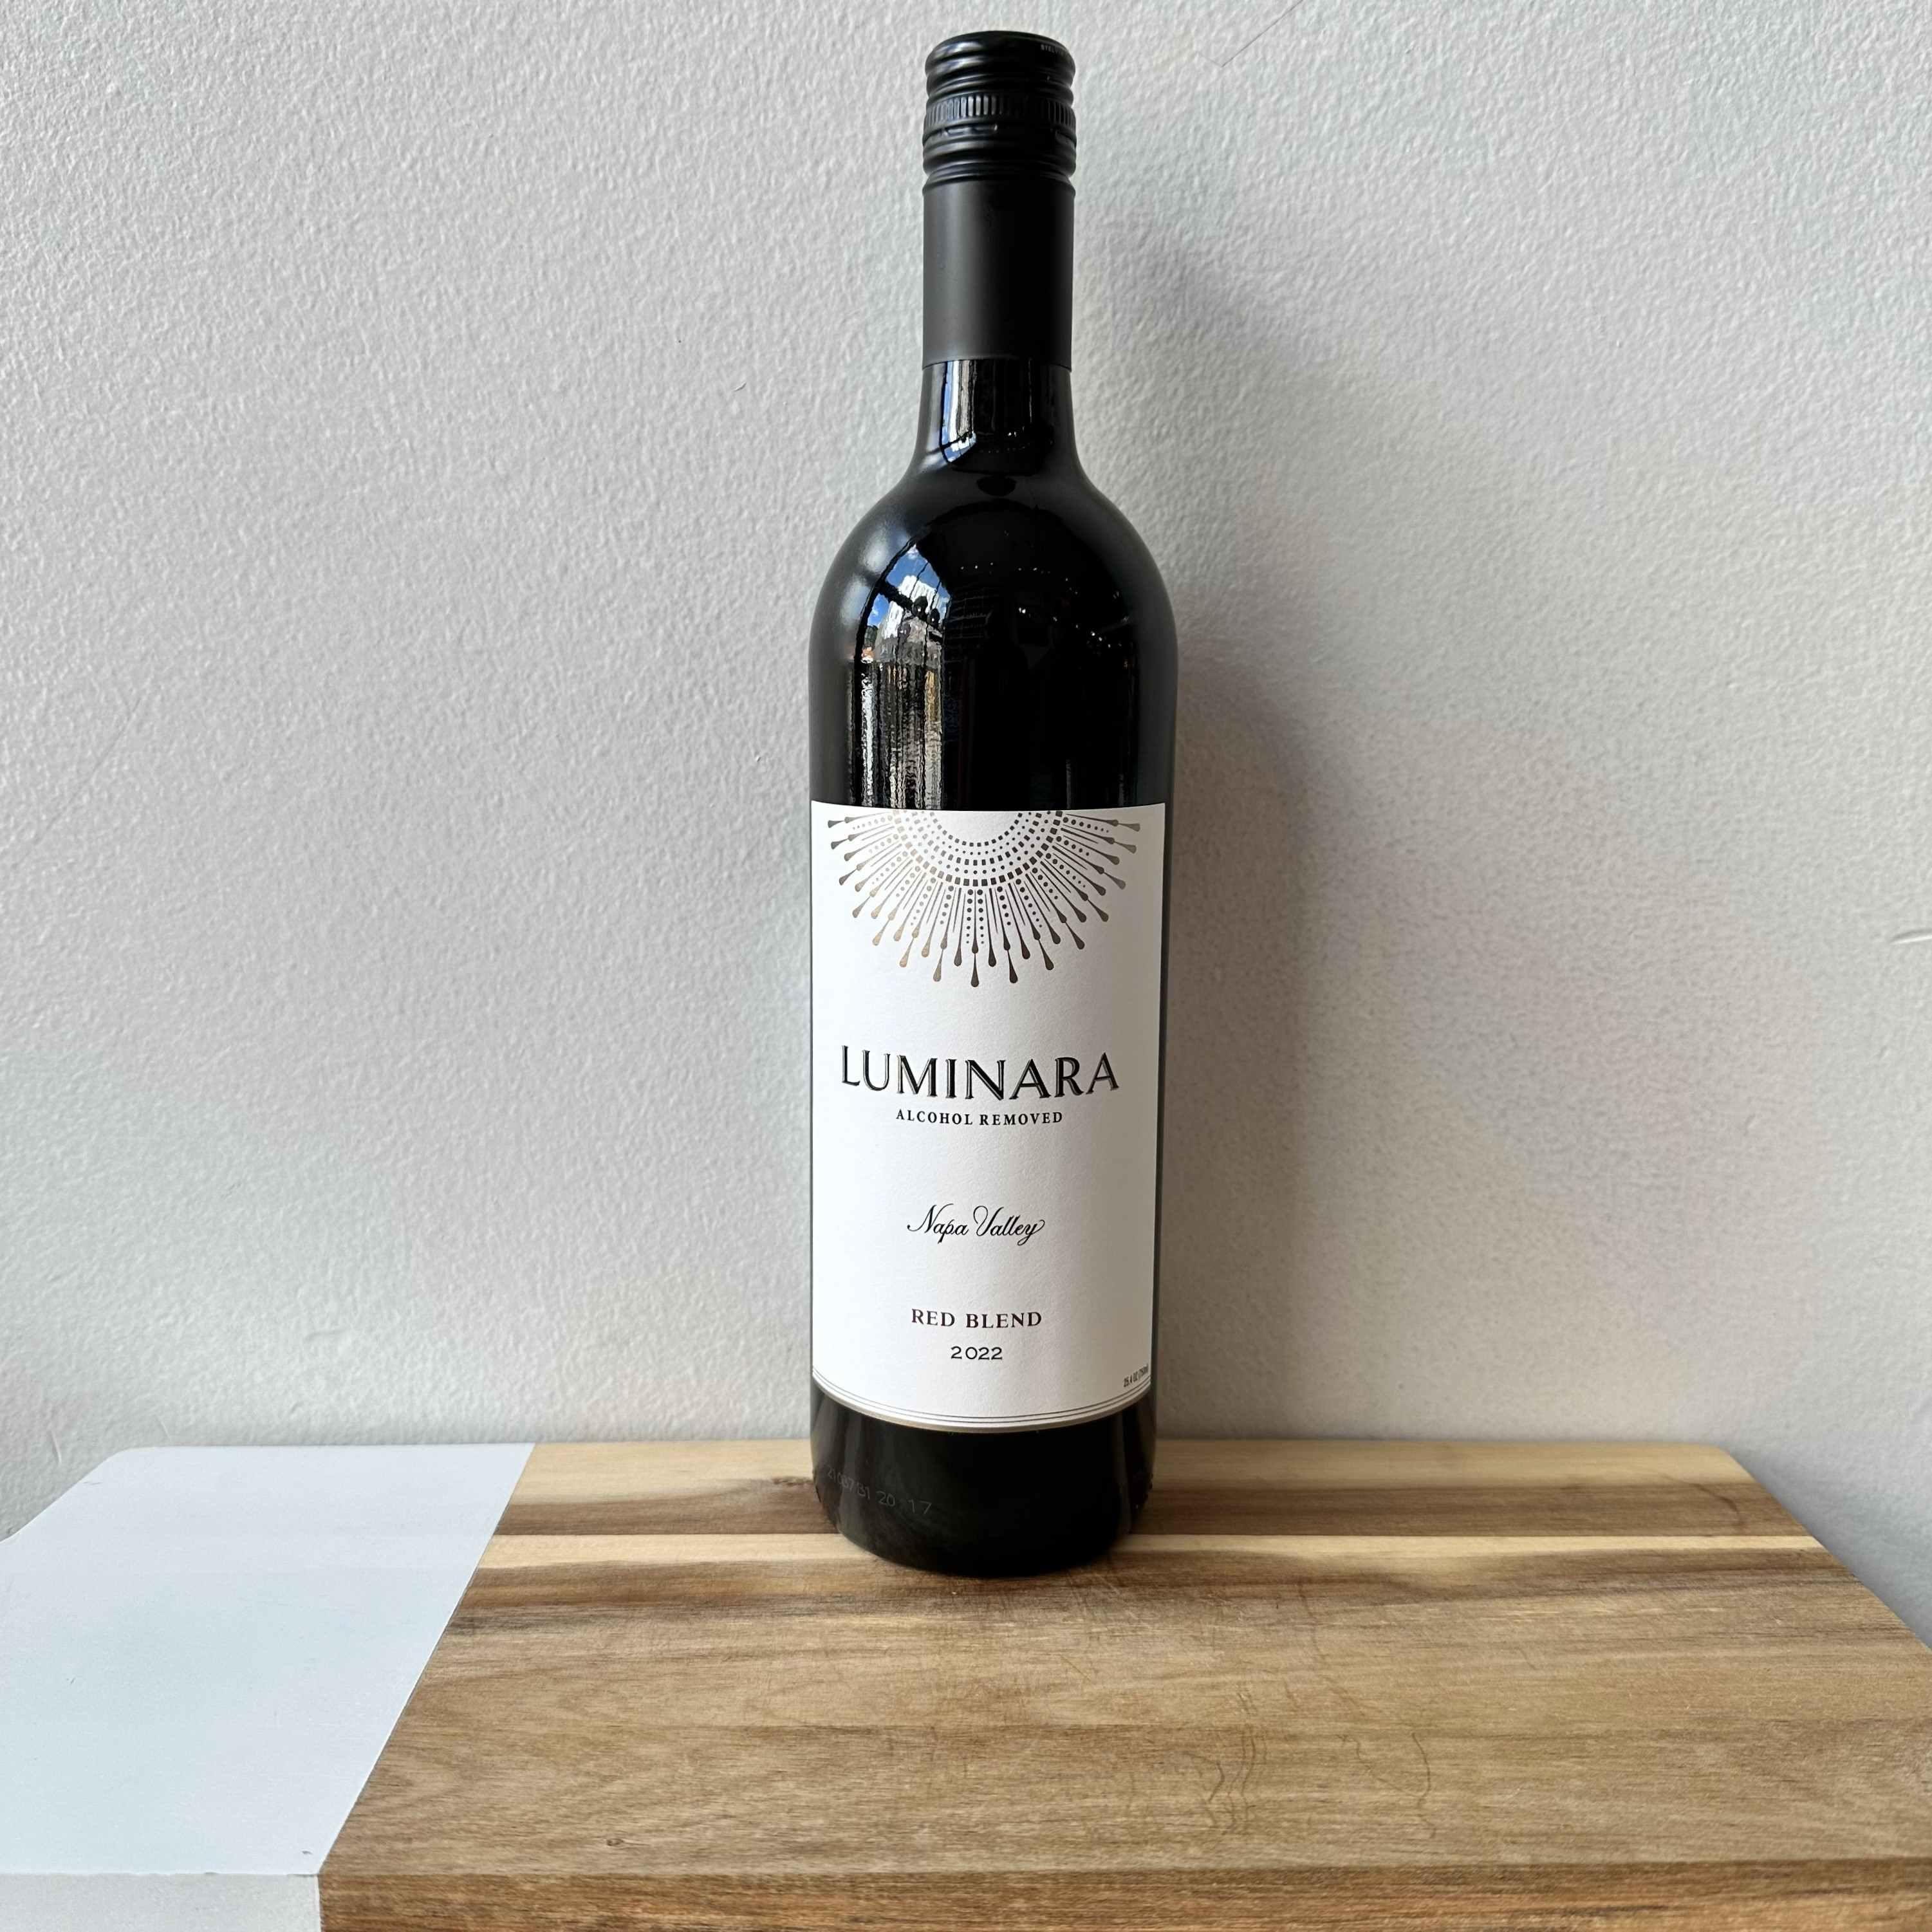 Luminara Beverages "Alcohol Removed" Red Blend 2022 Napa Valley